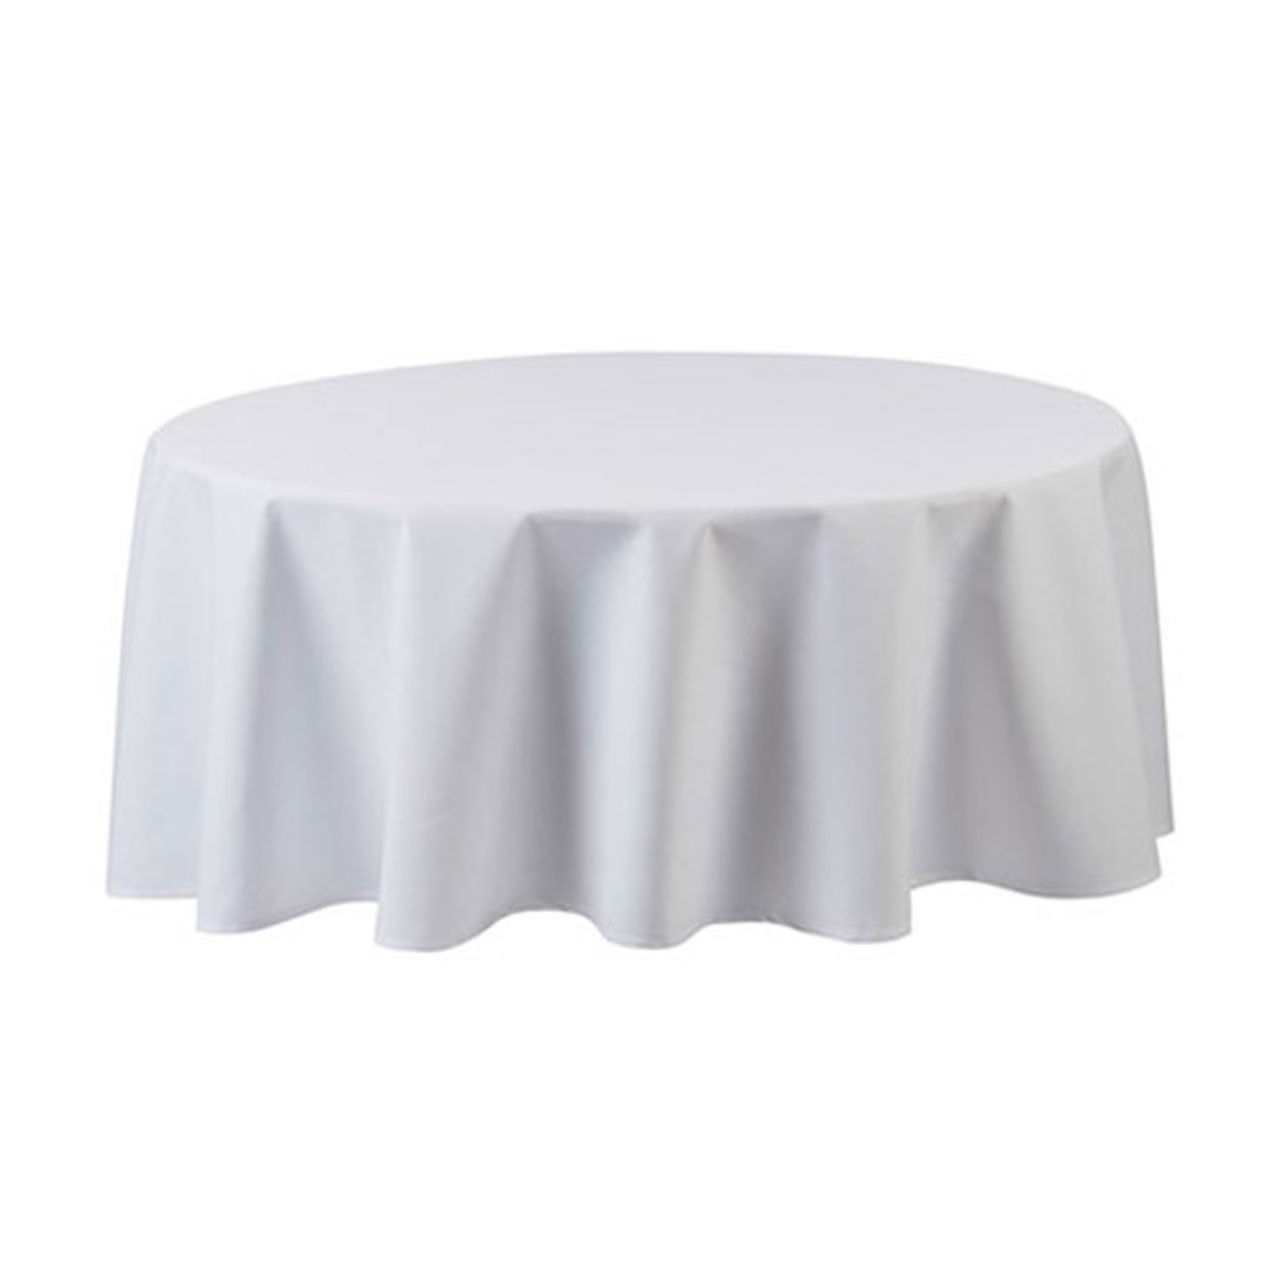 What color is the Seamless White 120" round tablecloth?